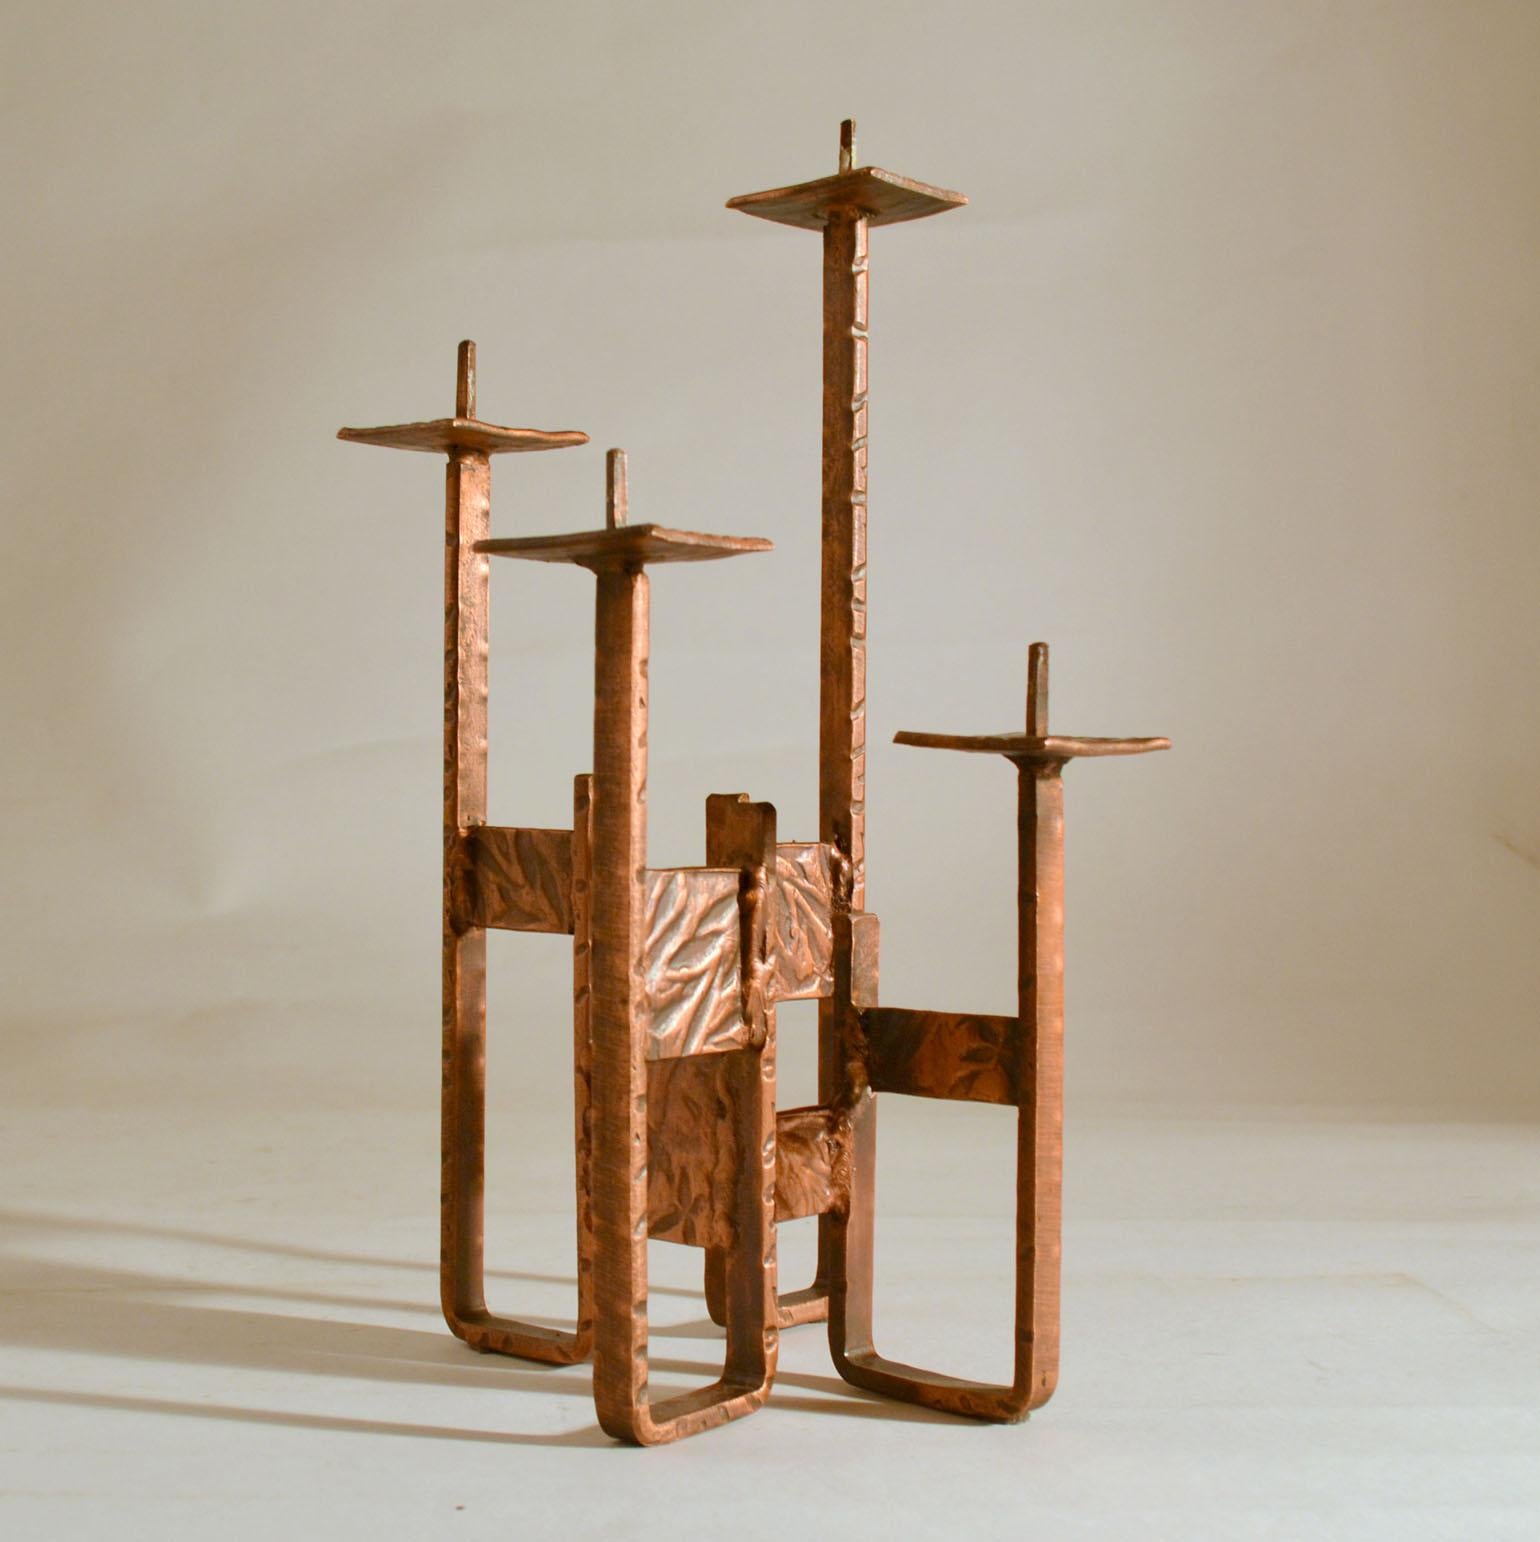 Candelabra for four candles on alternating is created in stationary positions, made in copper with hammered texture, Germany, 1970s. They can hold standard candles or pillar candles, 3-4 cm diameter.